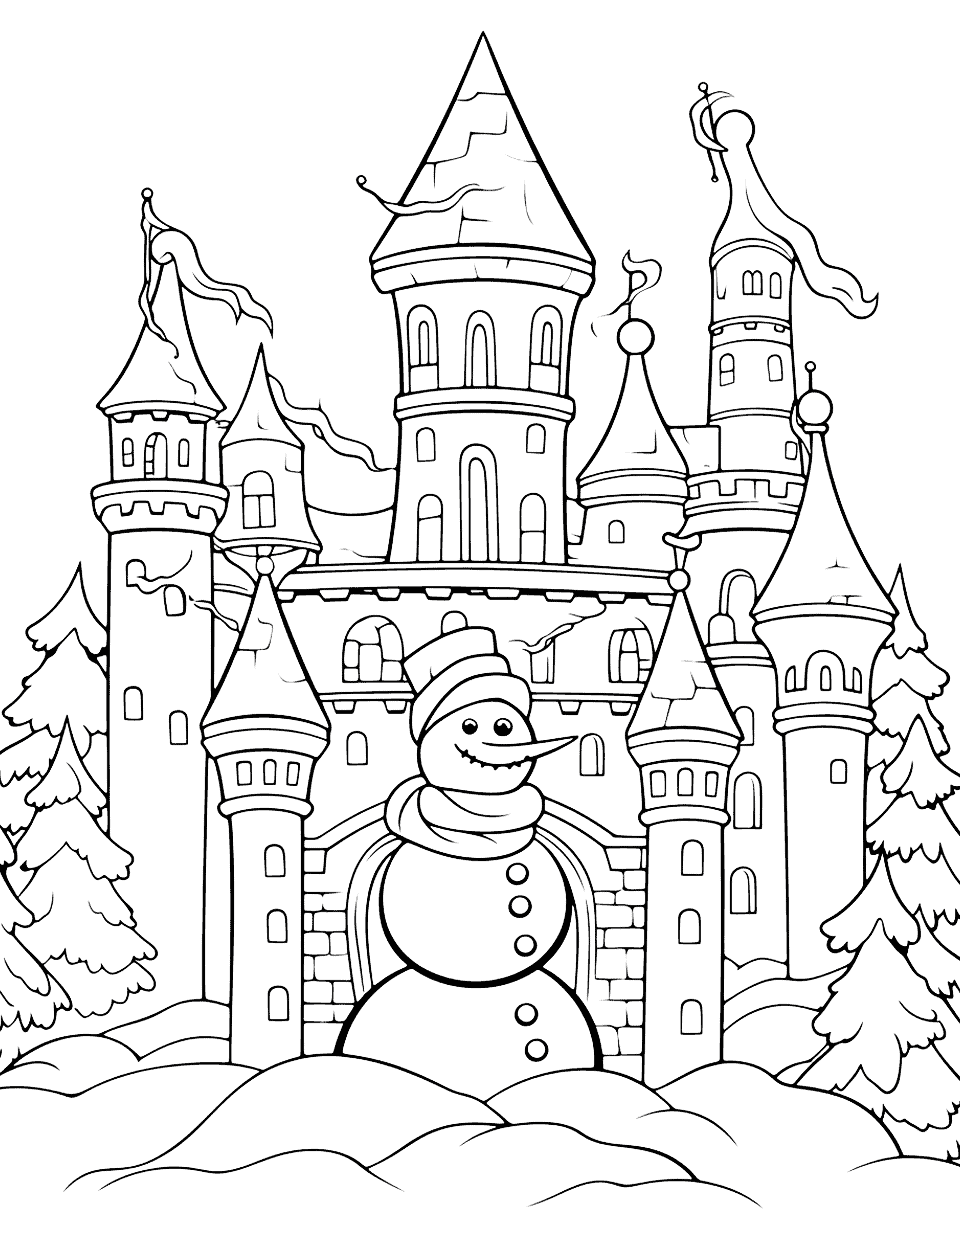 Intricate Winter Castle Coloring Page - An elaborate winter castle for older kids to color in.